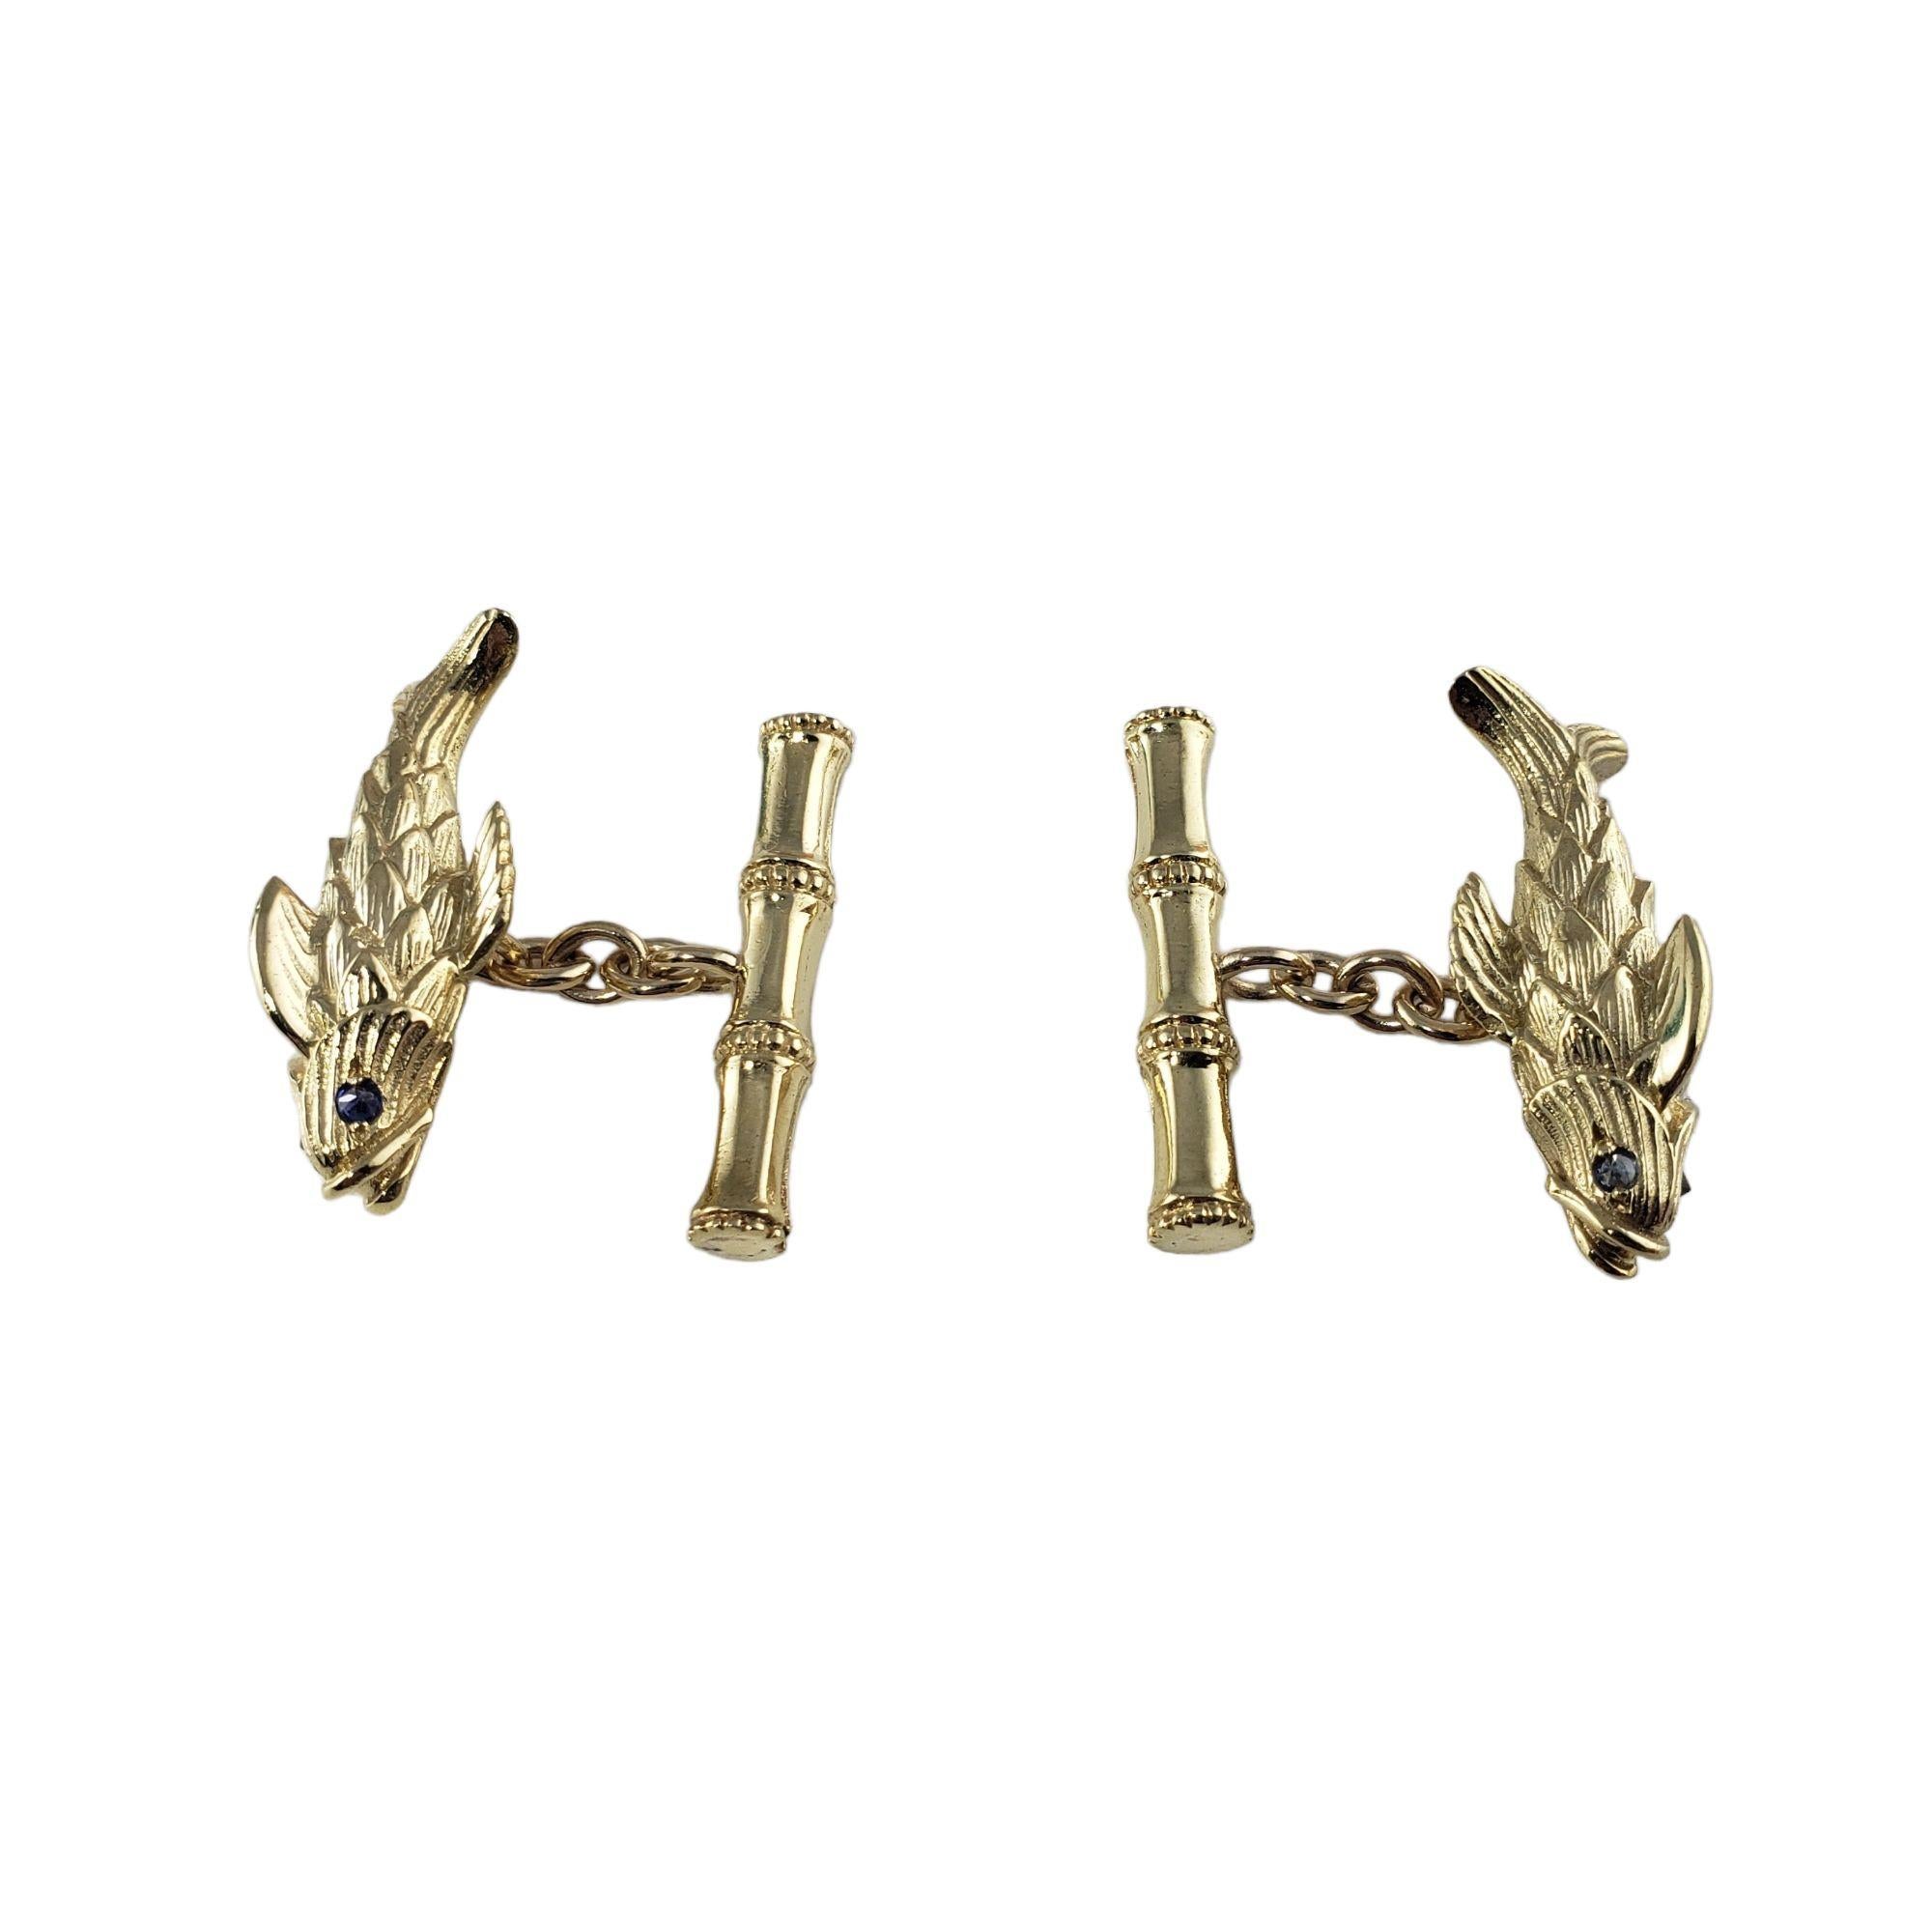 Vintage Tiffany & Co. Schlumberger 18 Karat Yellow Gold and Sapphire Koi Fish Cufflinks-

These elegant koi fish are beautifully detailed in 18K yellow gold by Schlumberger for Tiffany & Co. Each feature two blue sapphire eyes.

Size: 27 mm x 12